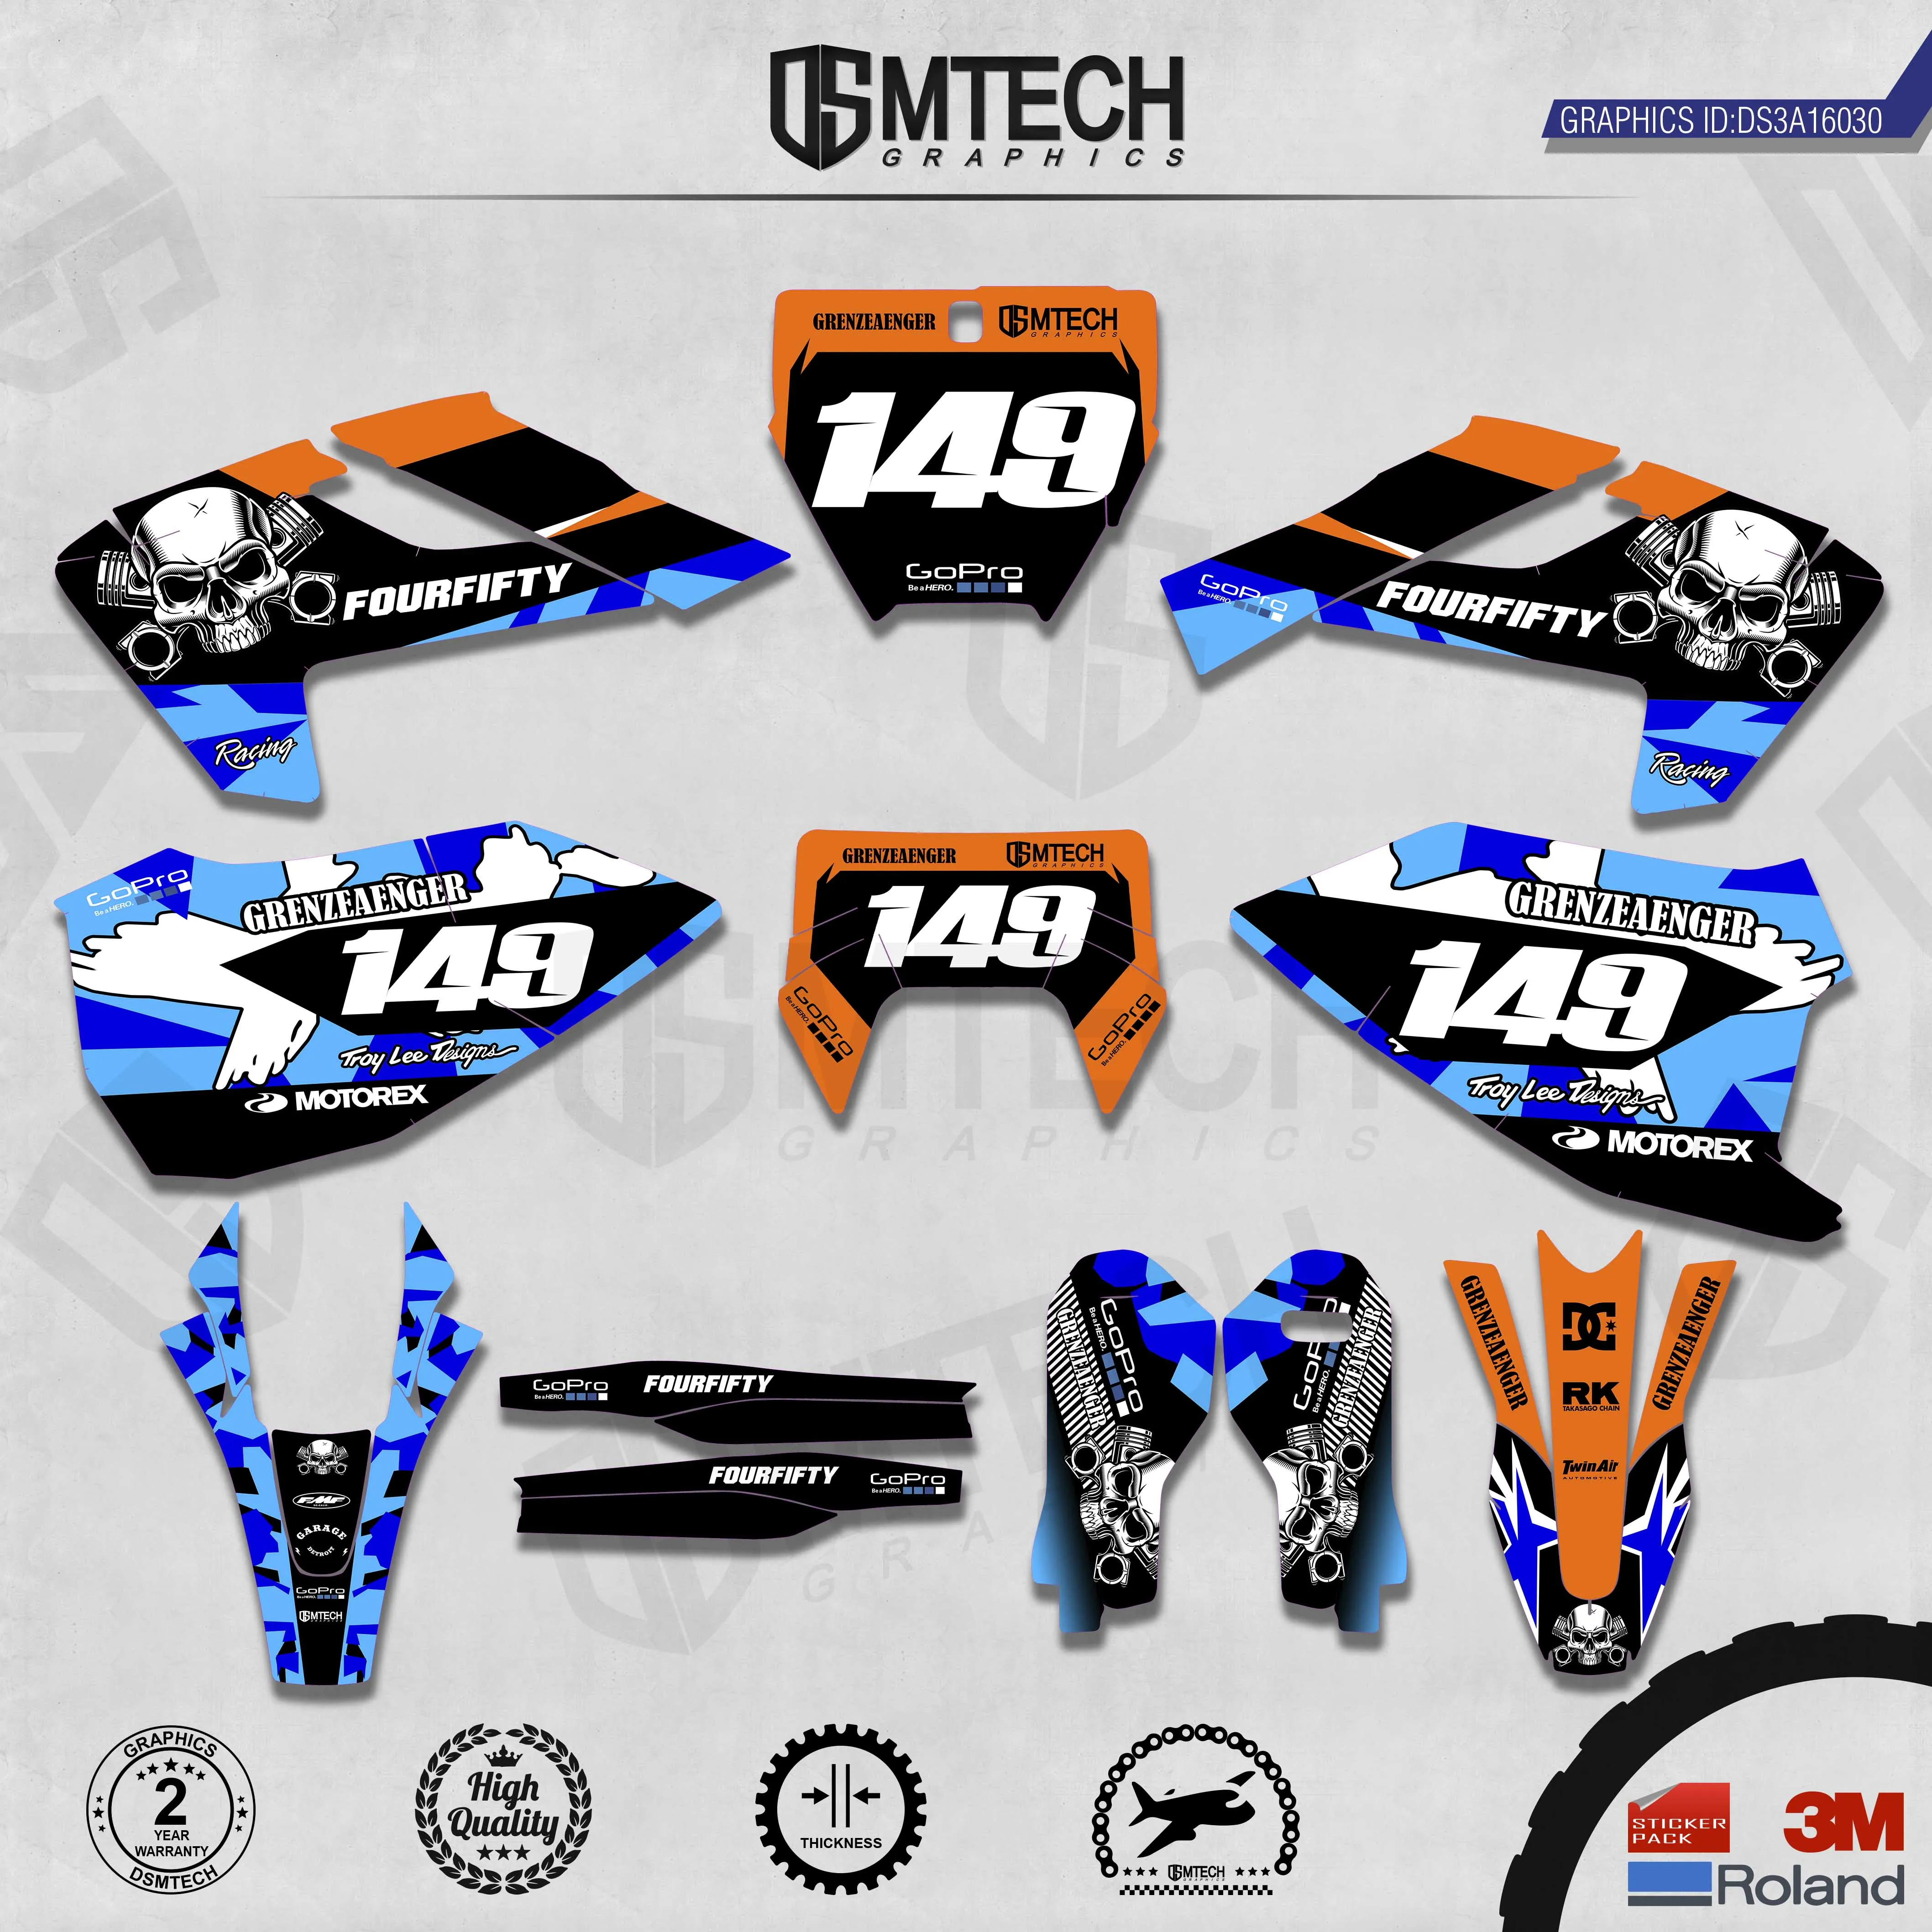 DSMTECH Customized Team Graphics Backgrounds Decals 3M Custom Stickers For TC FC TX FX FS 2016-2018  TE FE 2017-2019  030